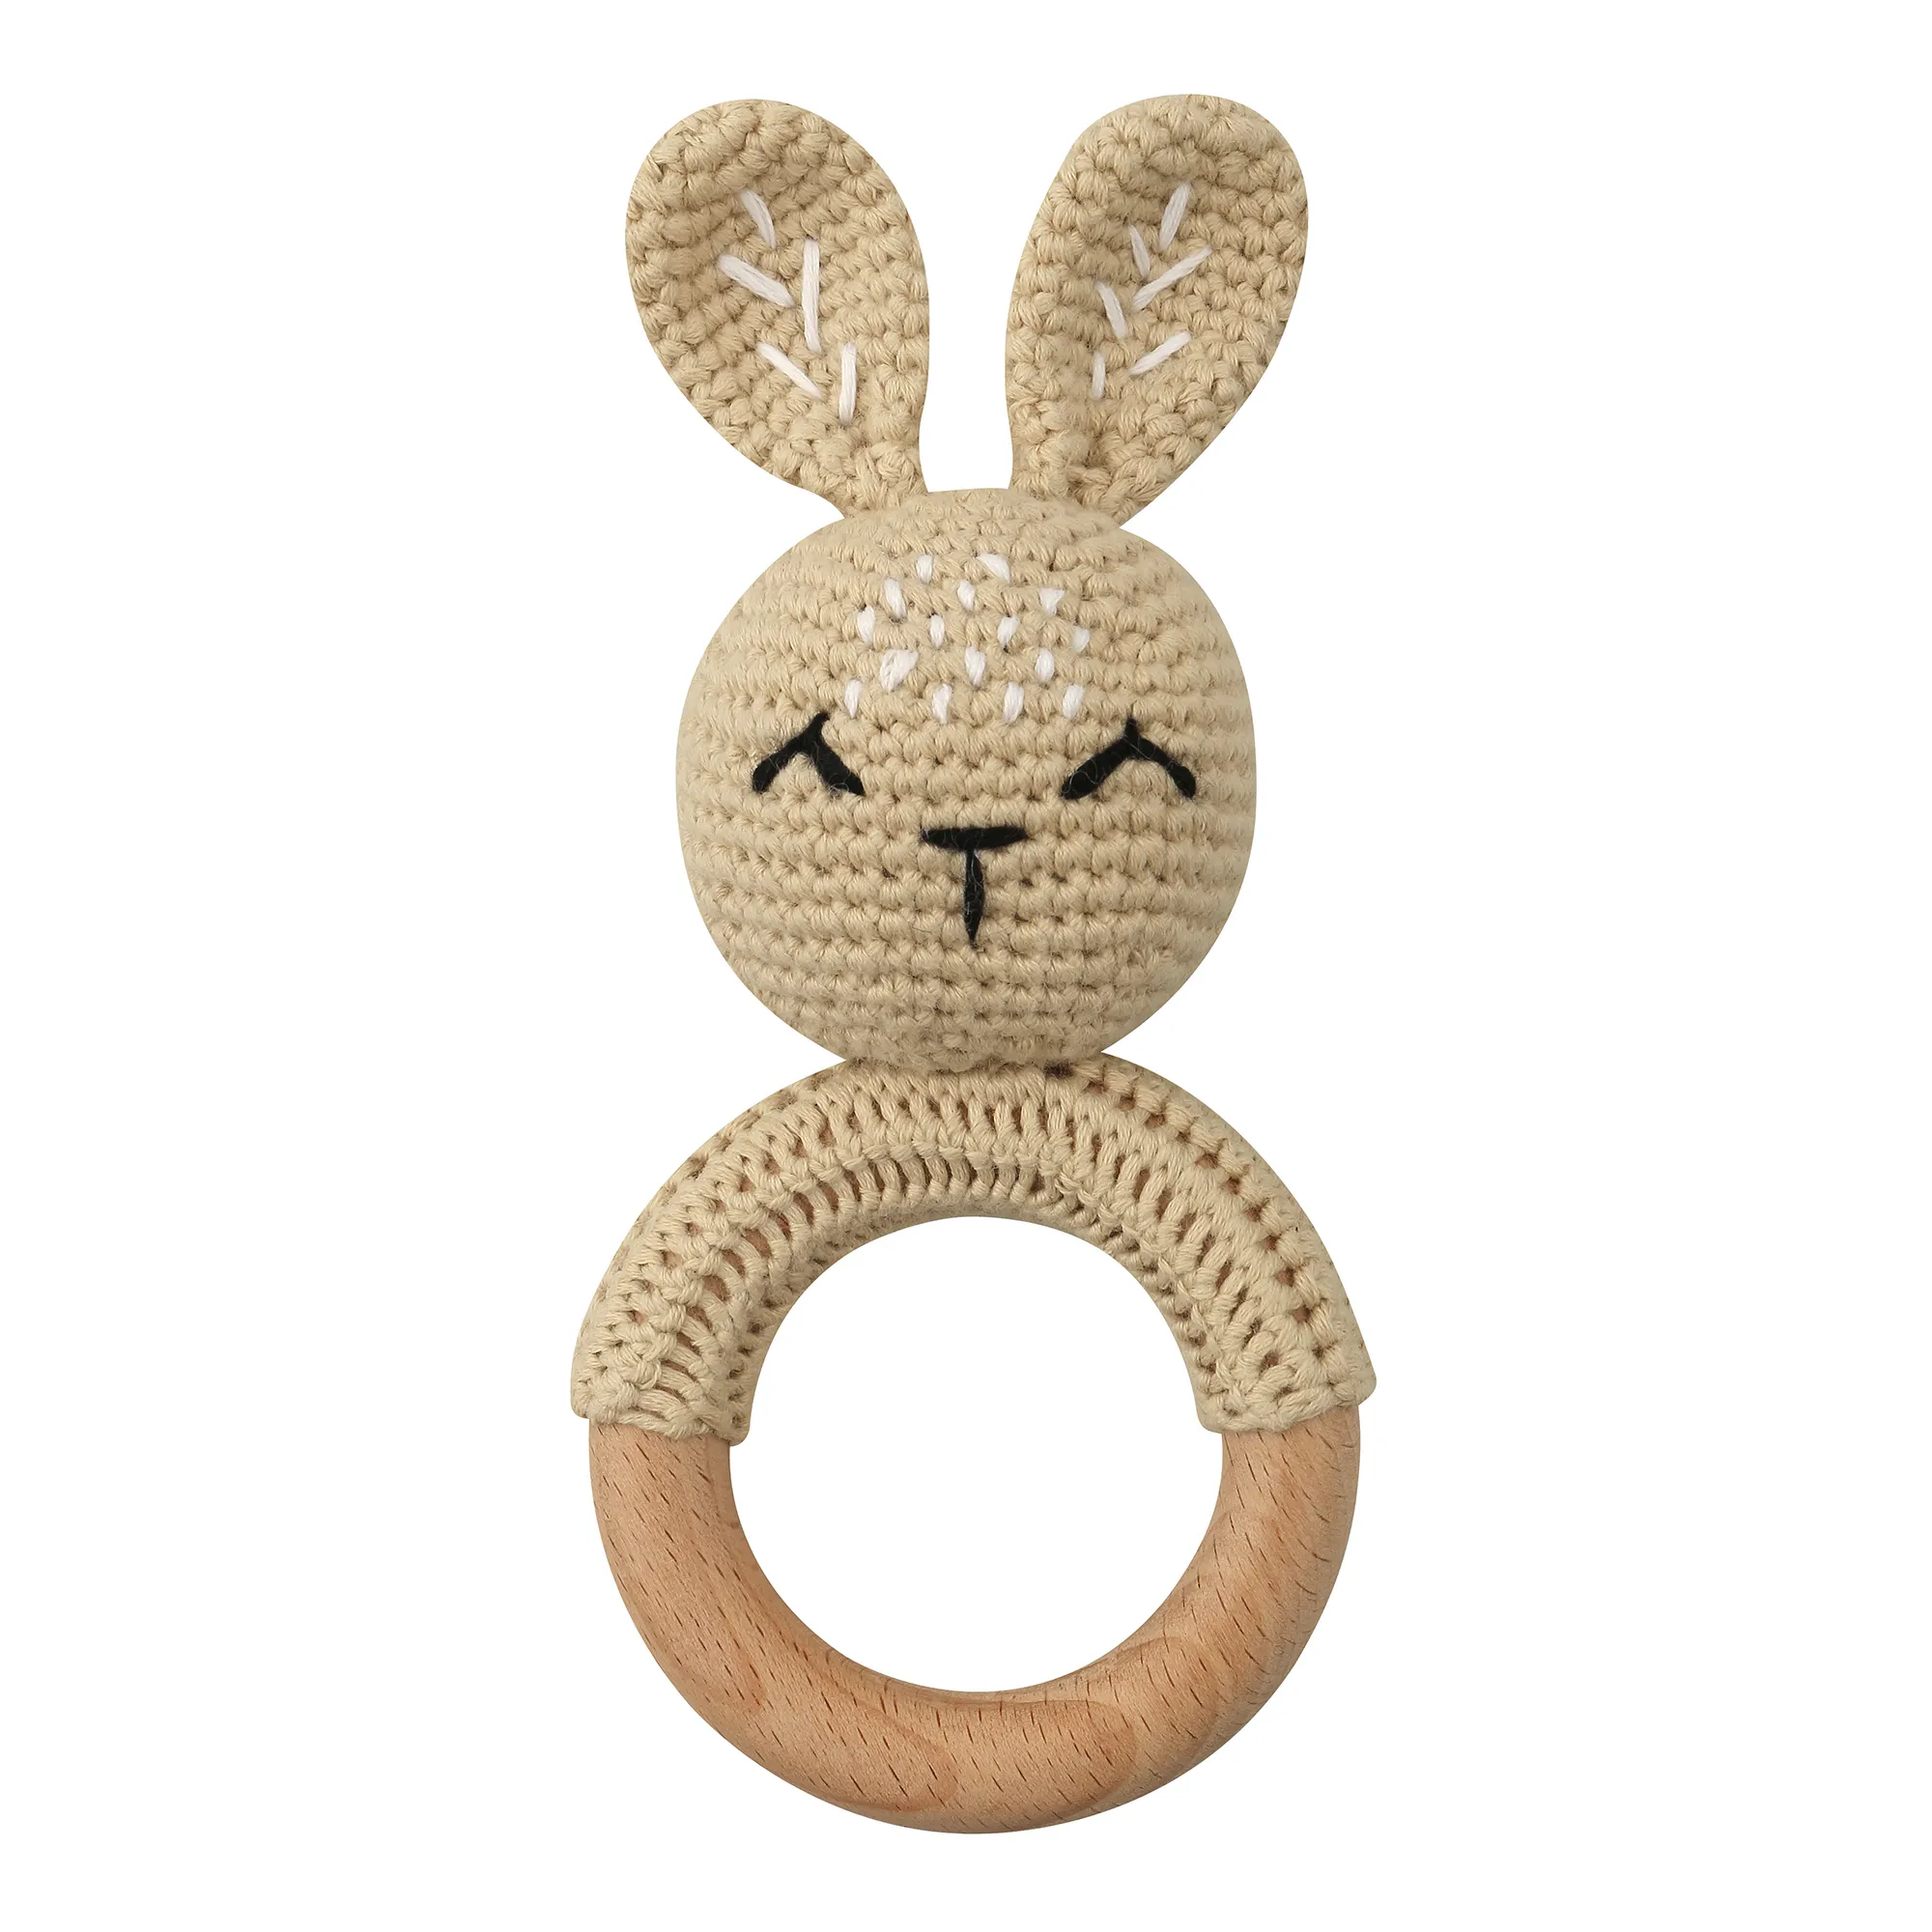 Popular Baby Cotton Beech Wood Cute Bunny Soft Teething Rattle Toy Toddler Crochet Teether Chewing Toys